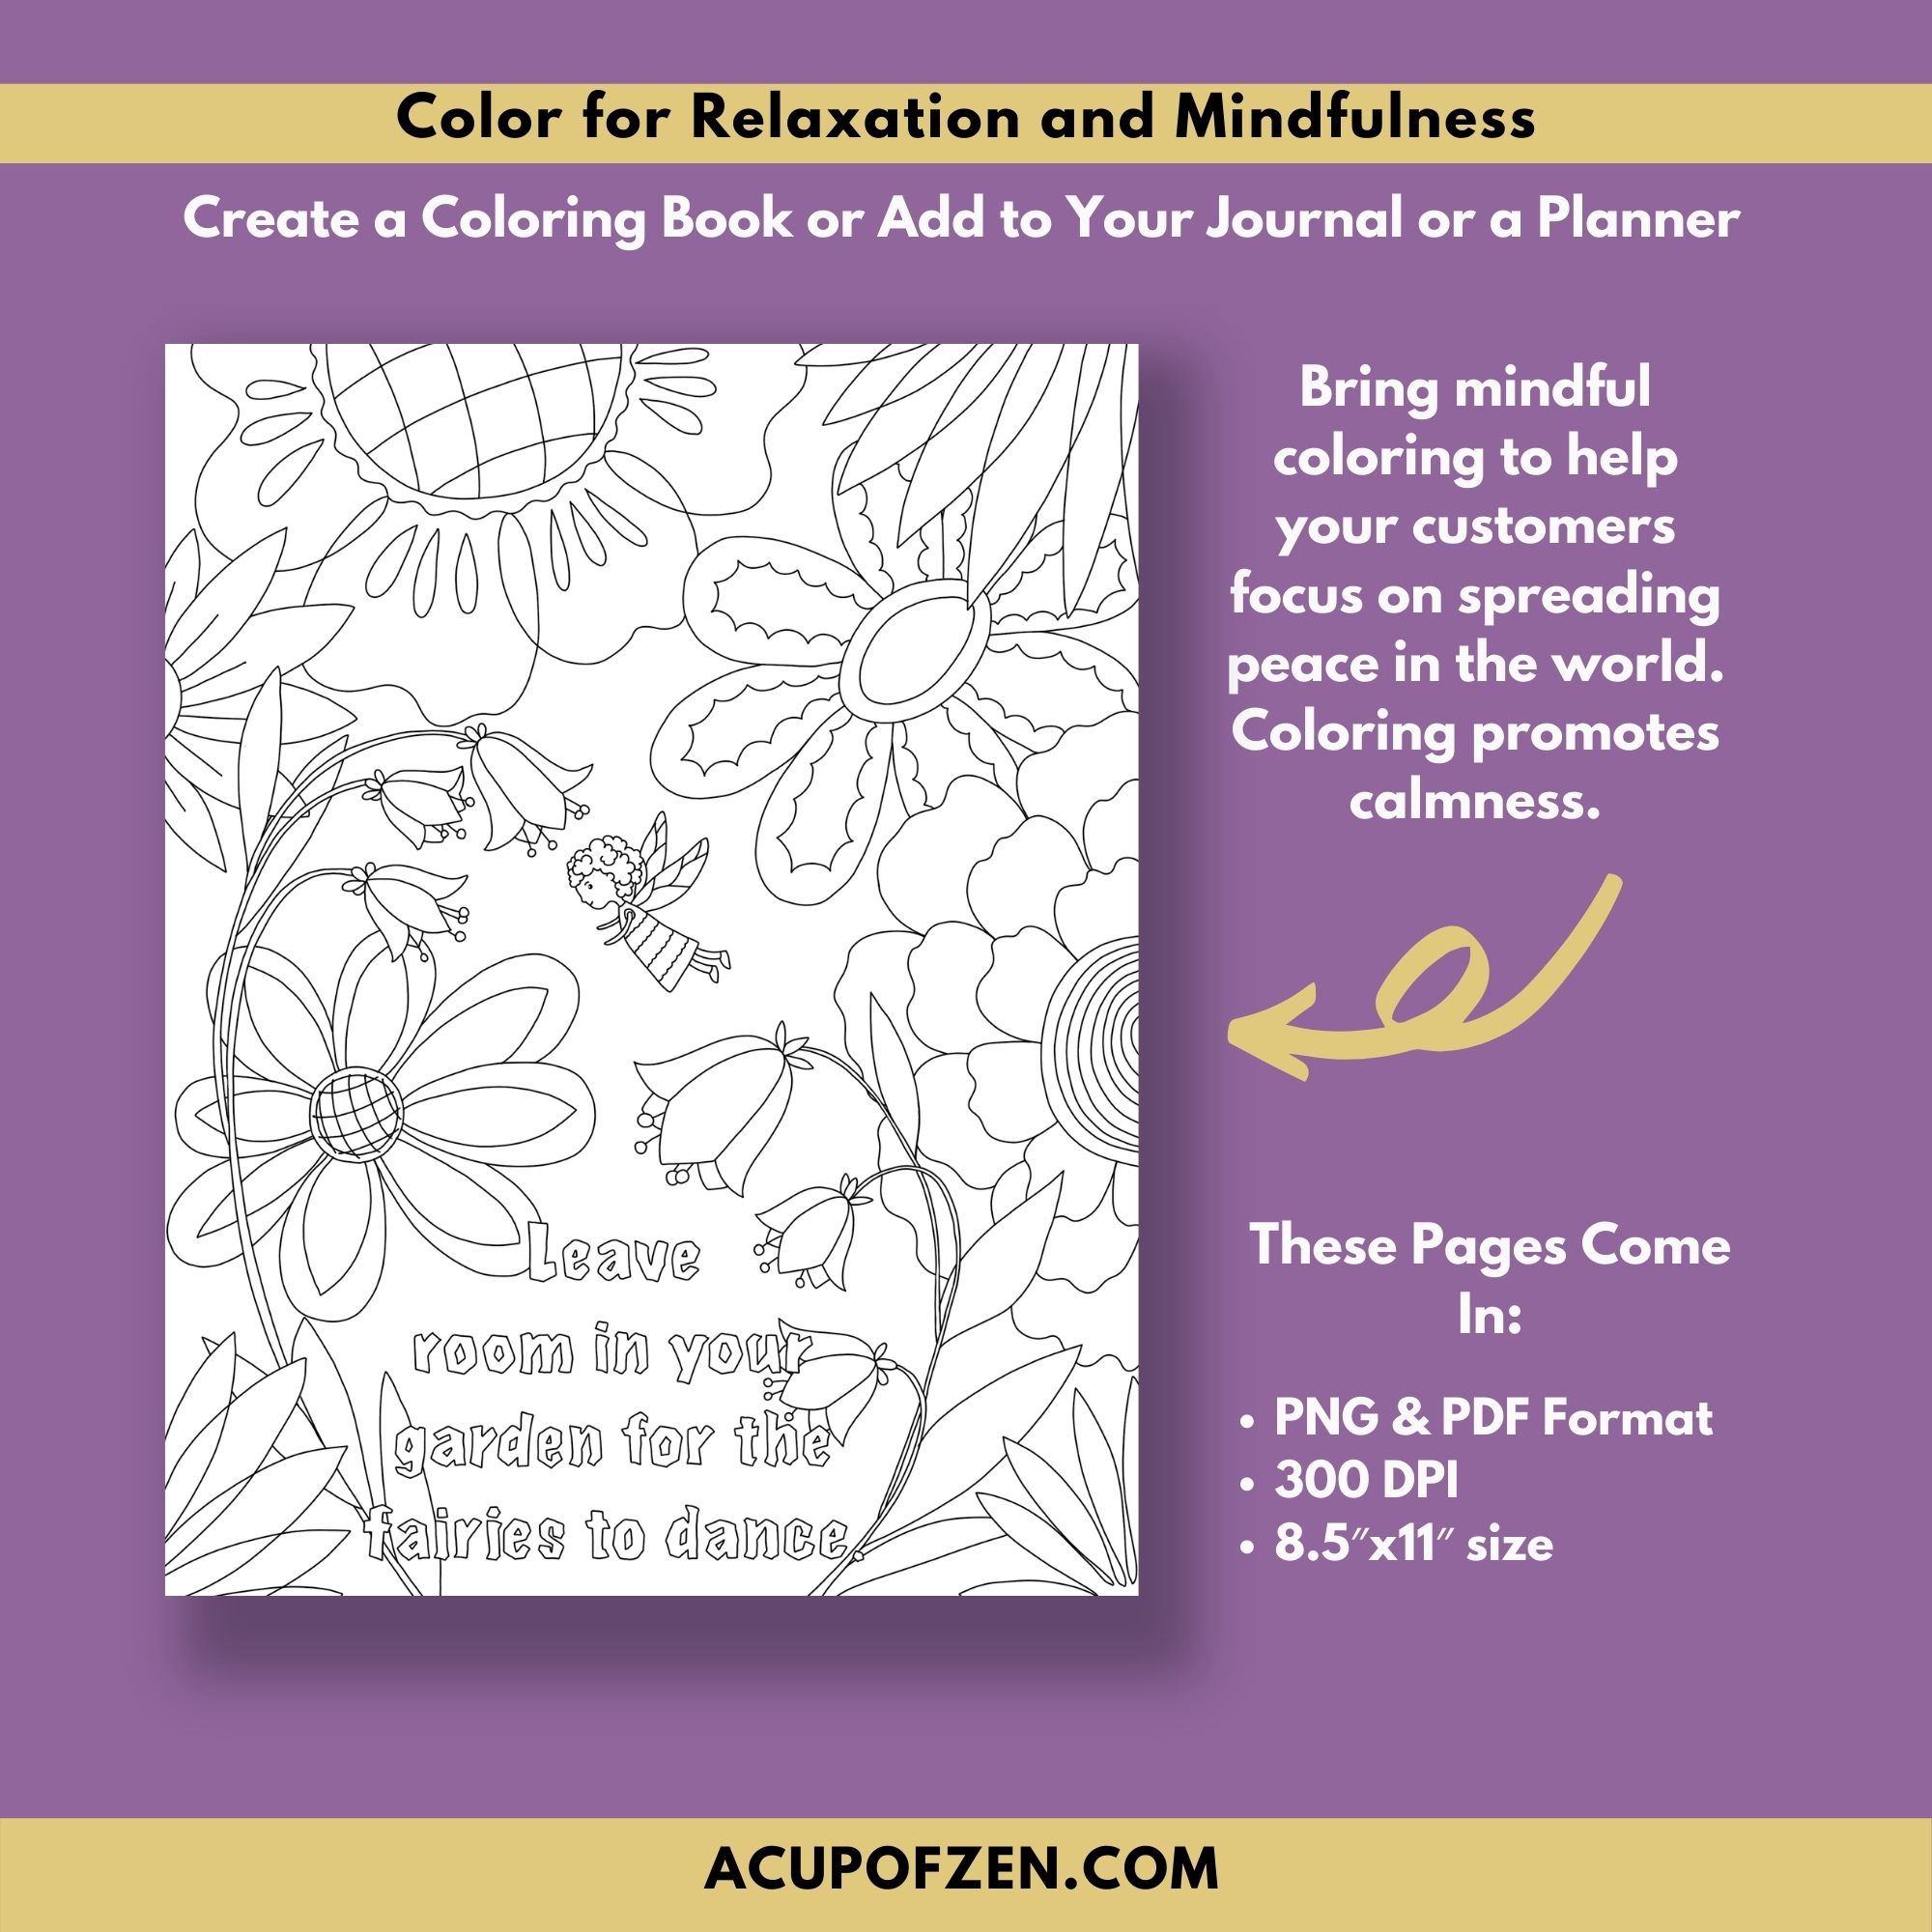 Quotes about life coloring pages commercial use